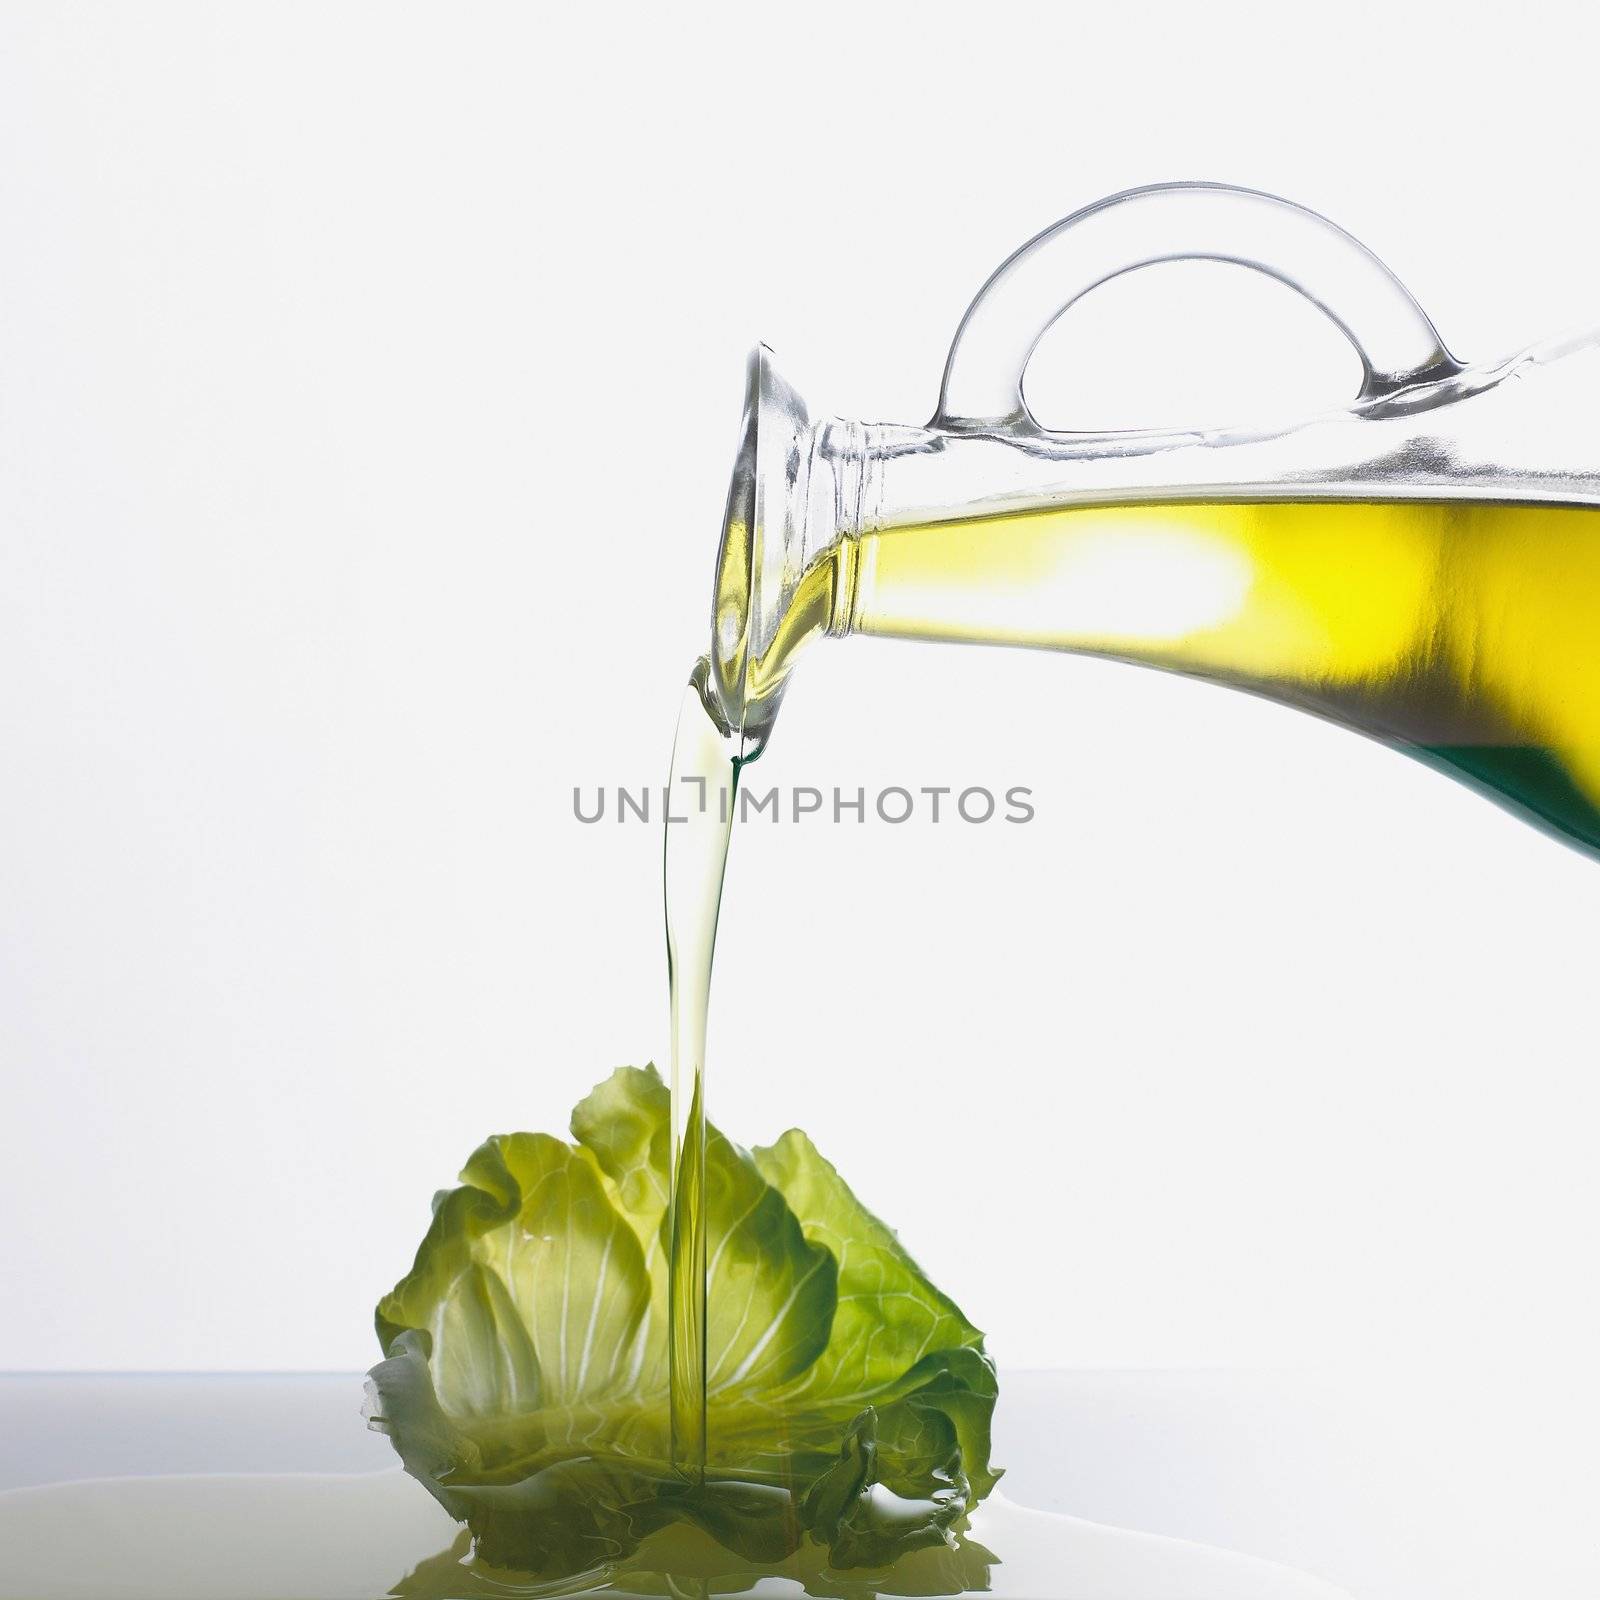 Pouring Olive Oil